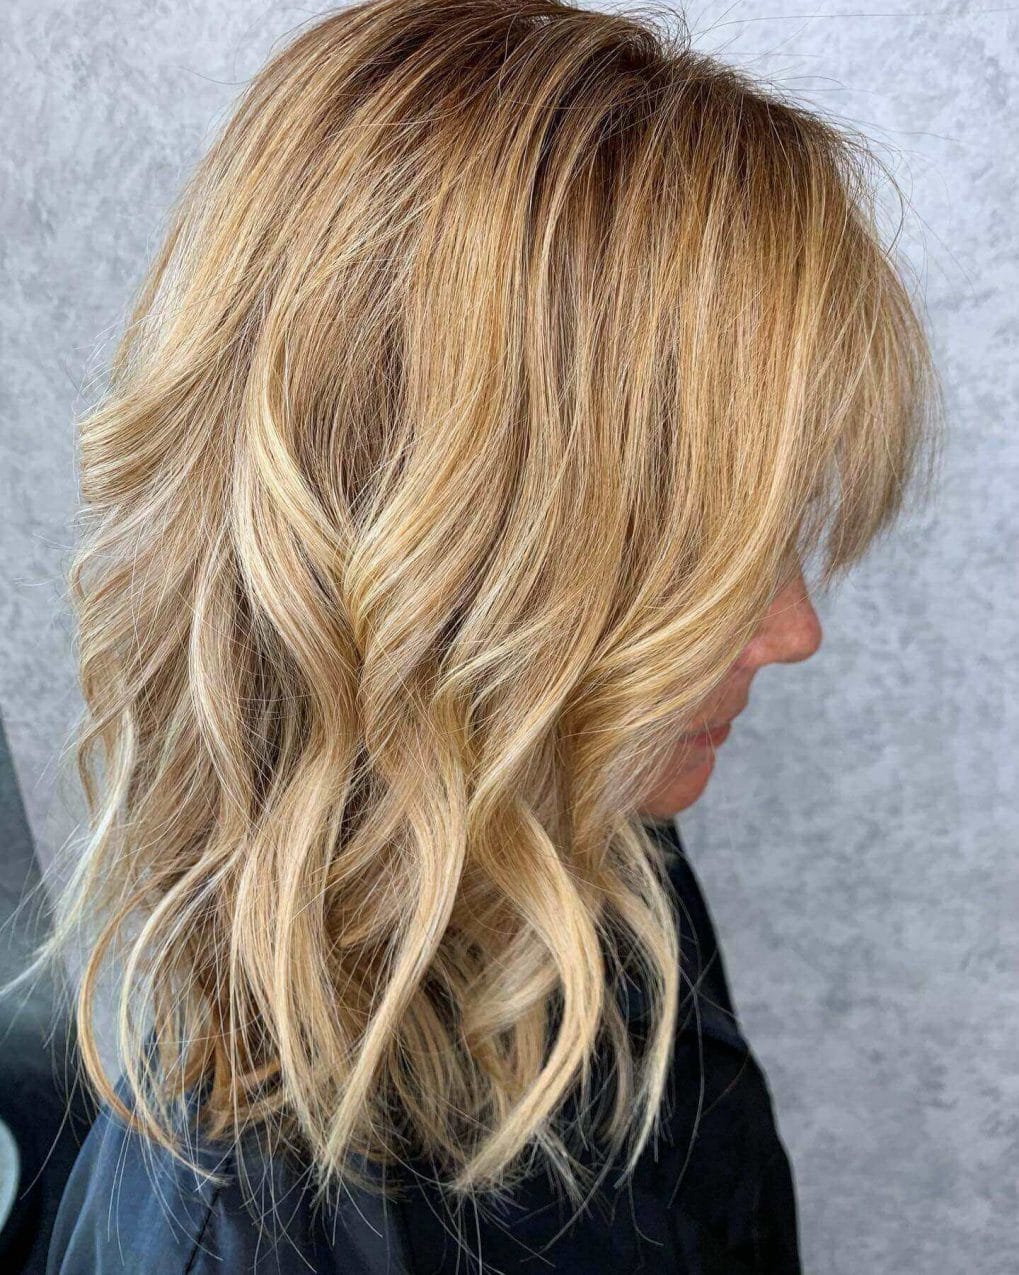 Sun-kissed blonde, medium-length hair with playful waves and perfect layers.